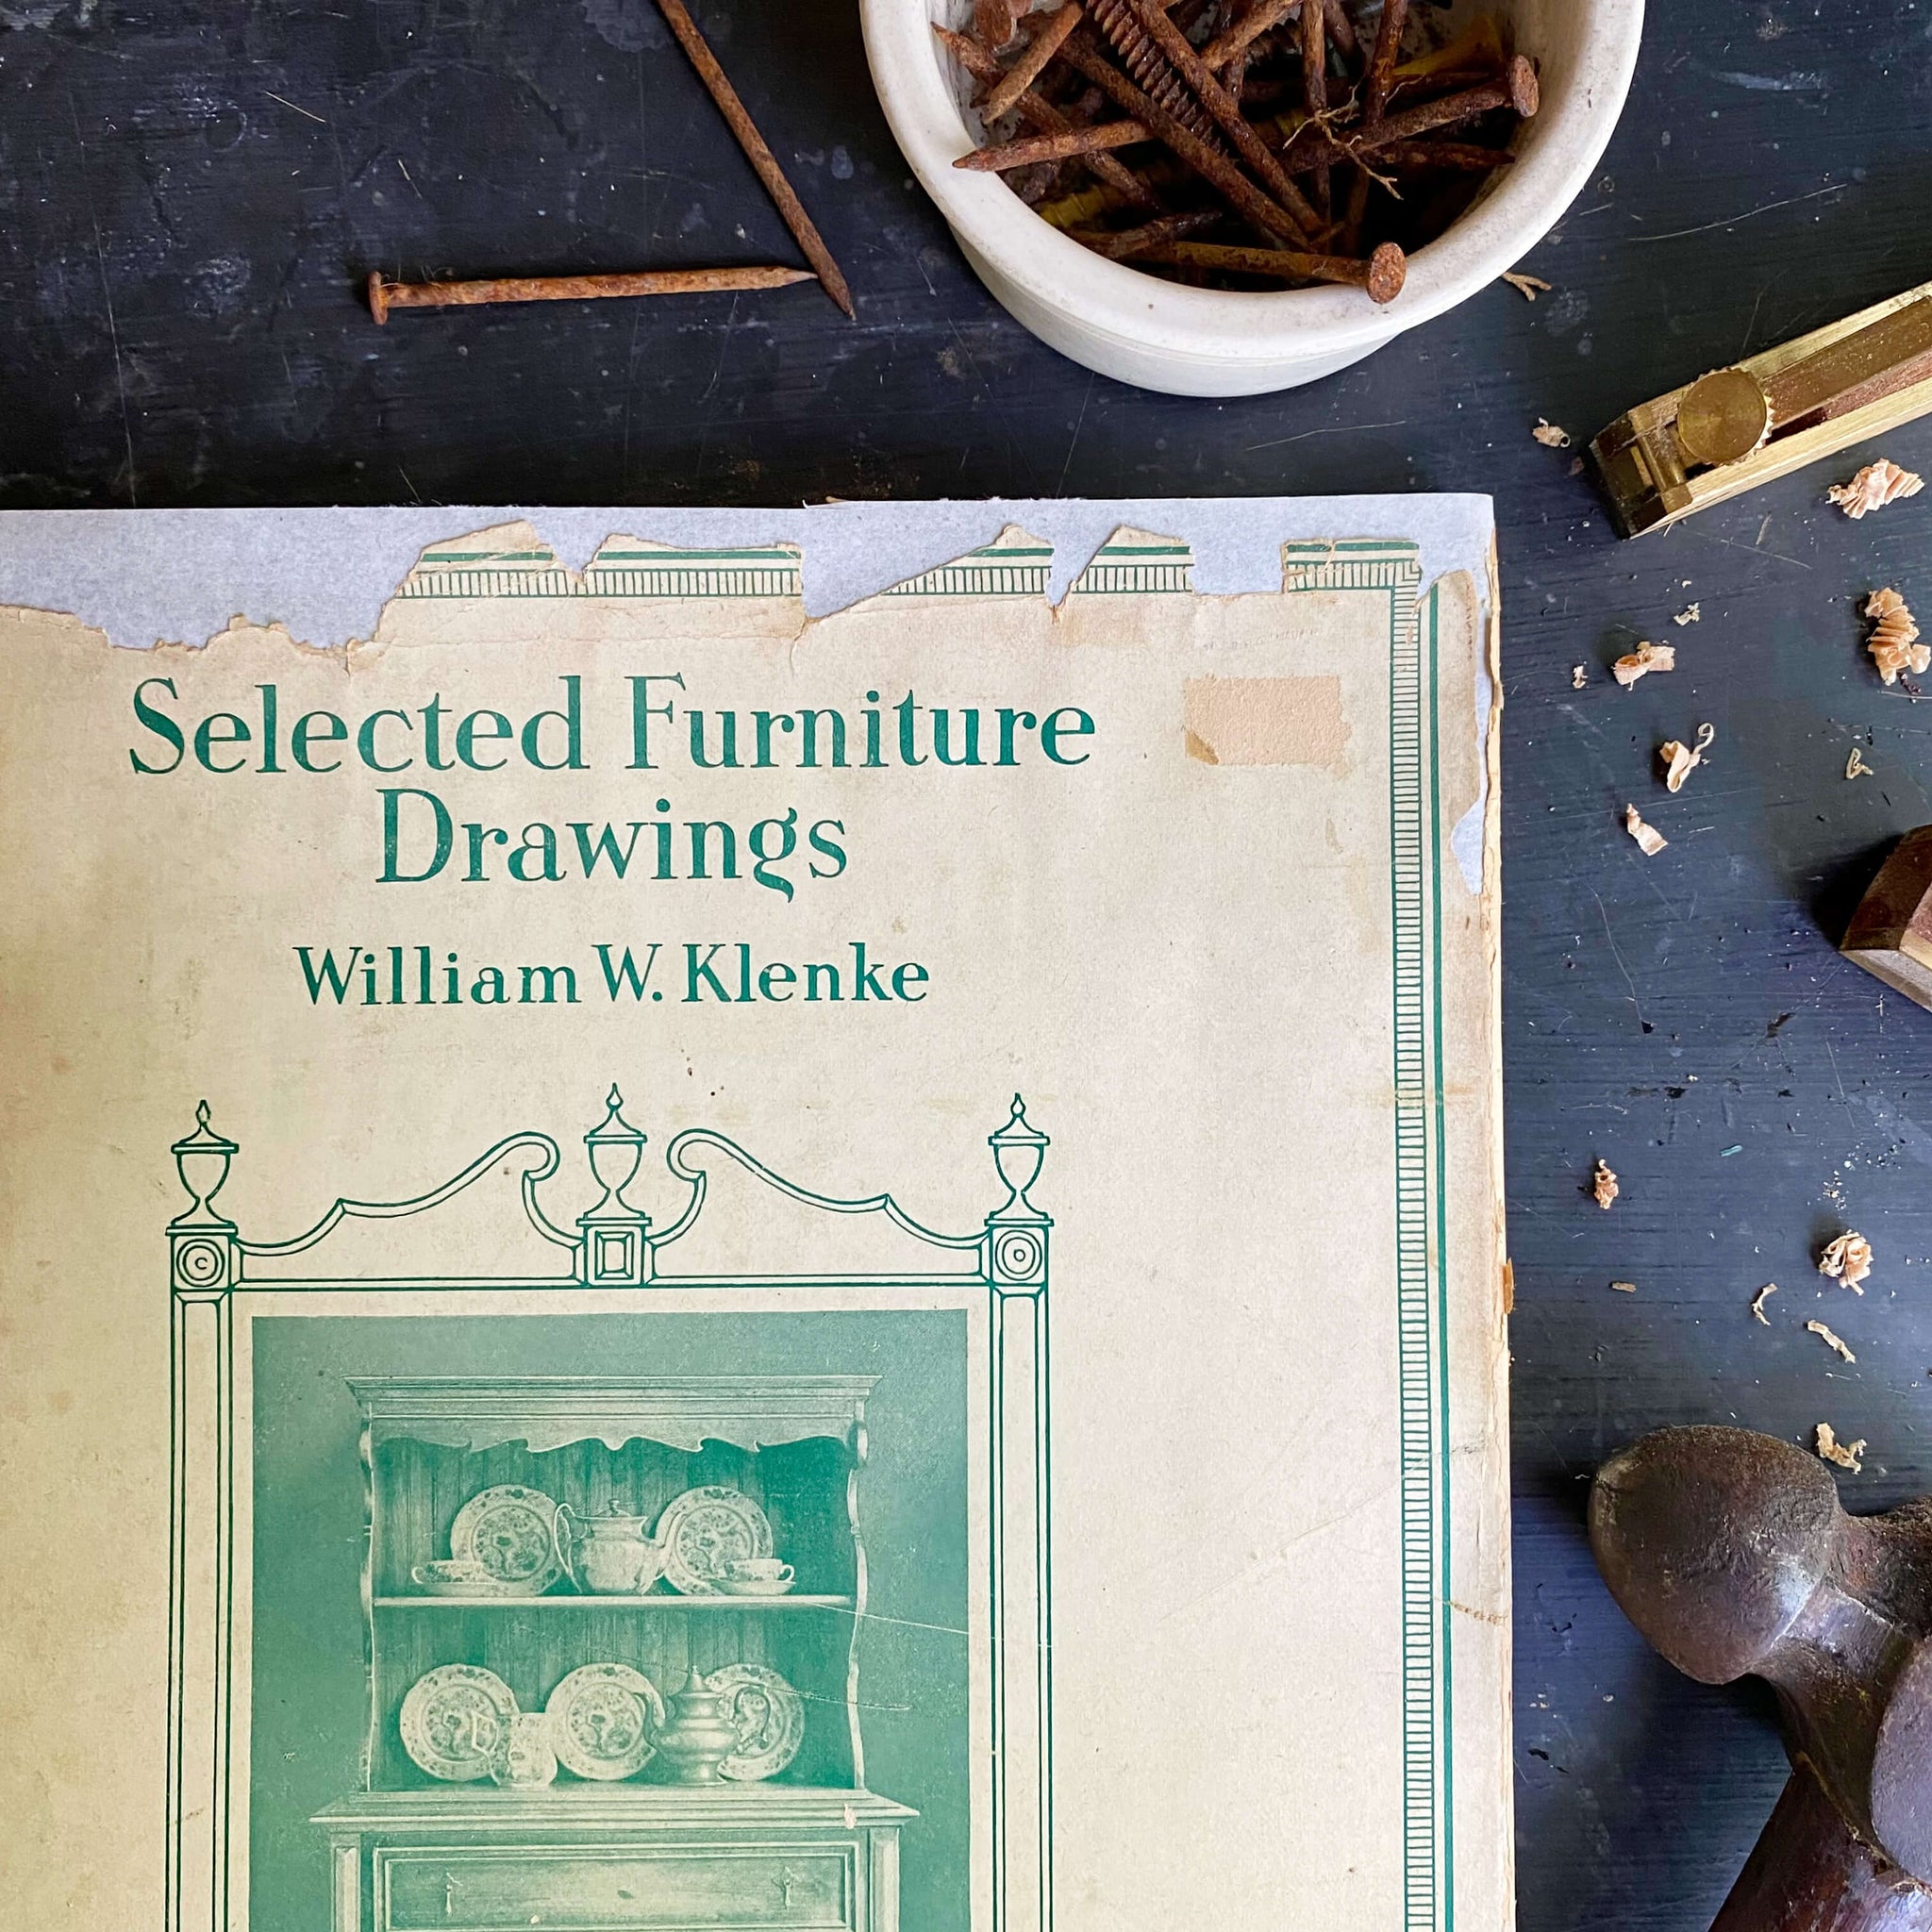 Selected Furniture Drawings by William W. Klenke- 1930 Edition